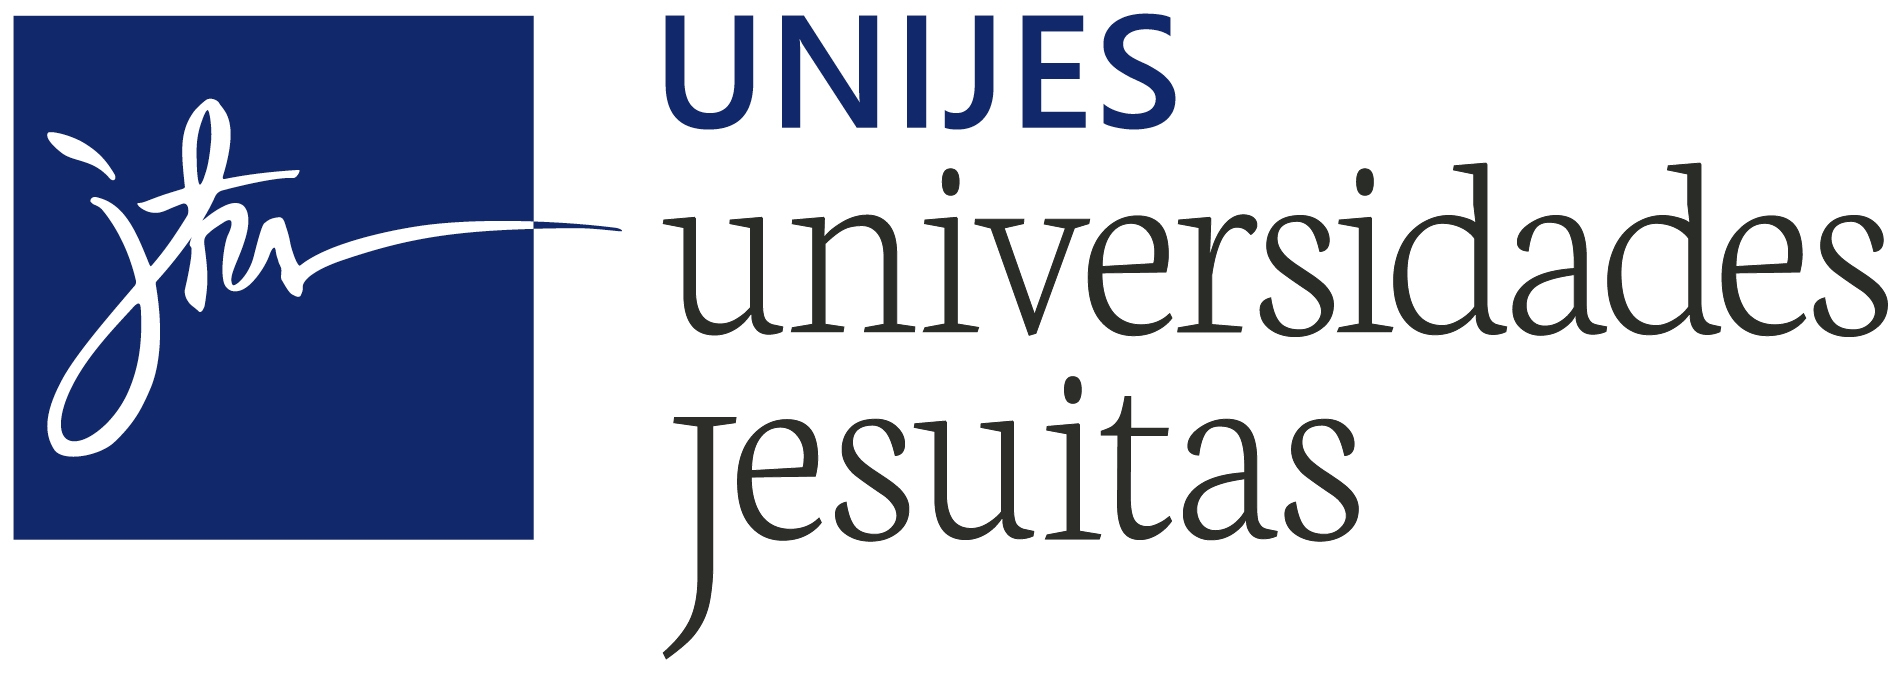 Logo of UNIJES, which stands for Jesuit Universities, featuring a blue square with a white signature and text